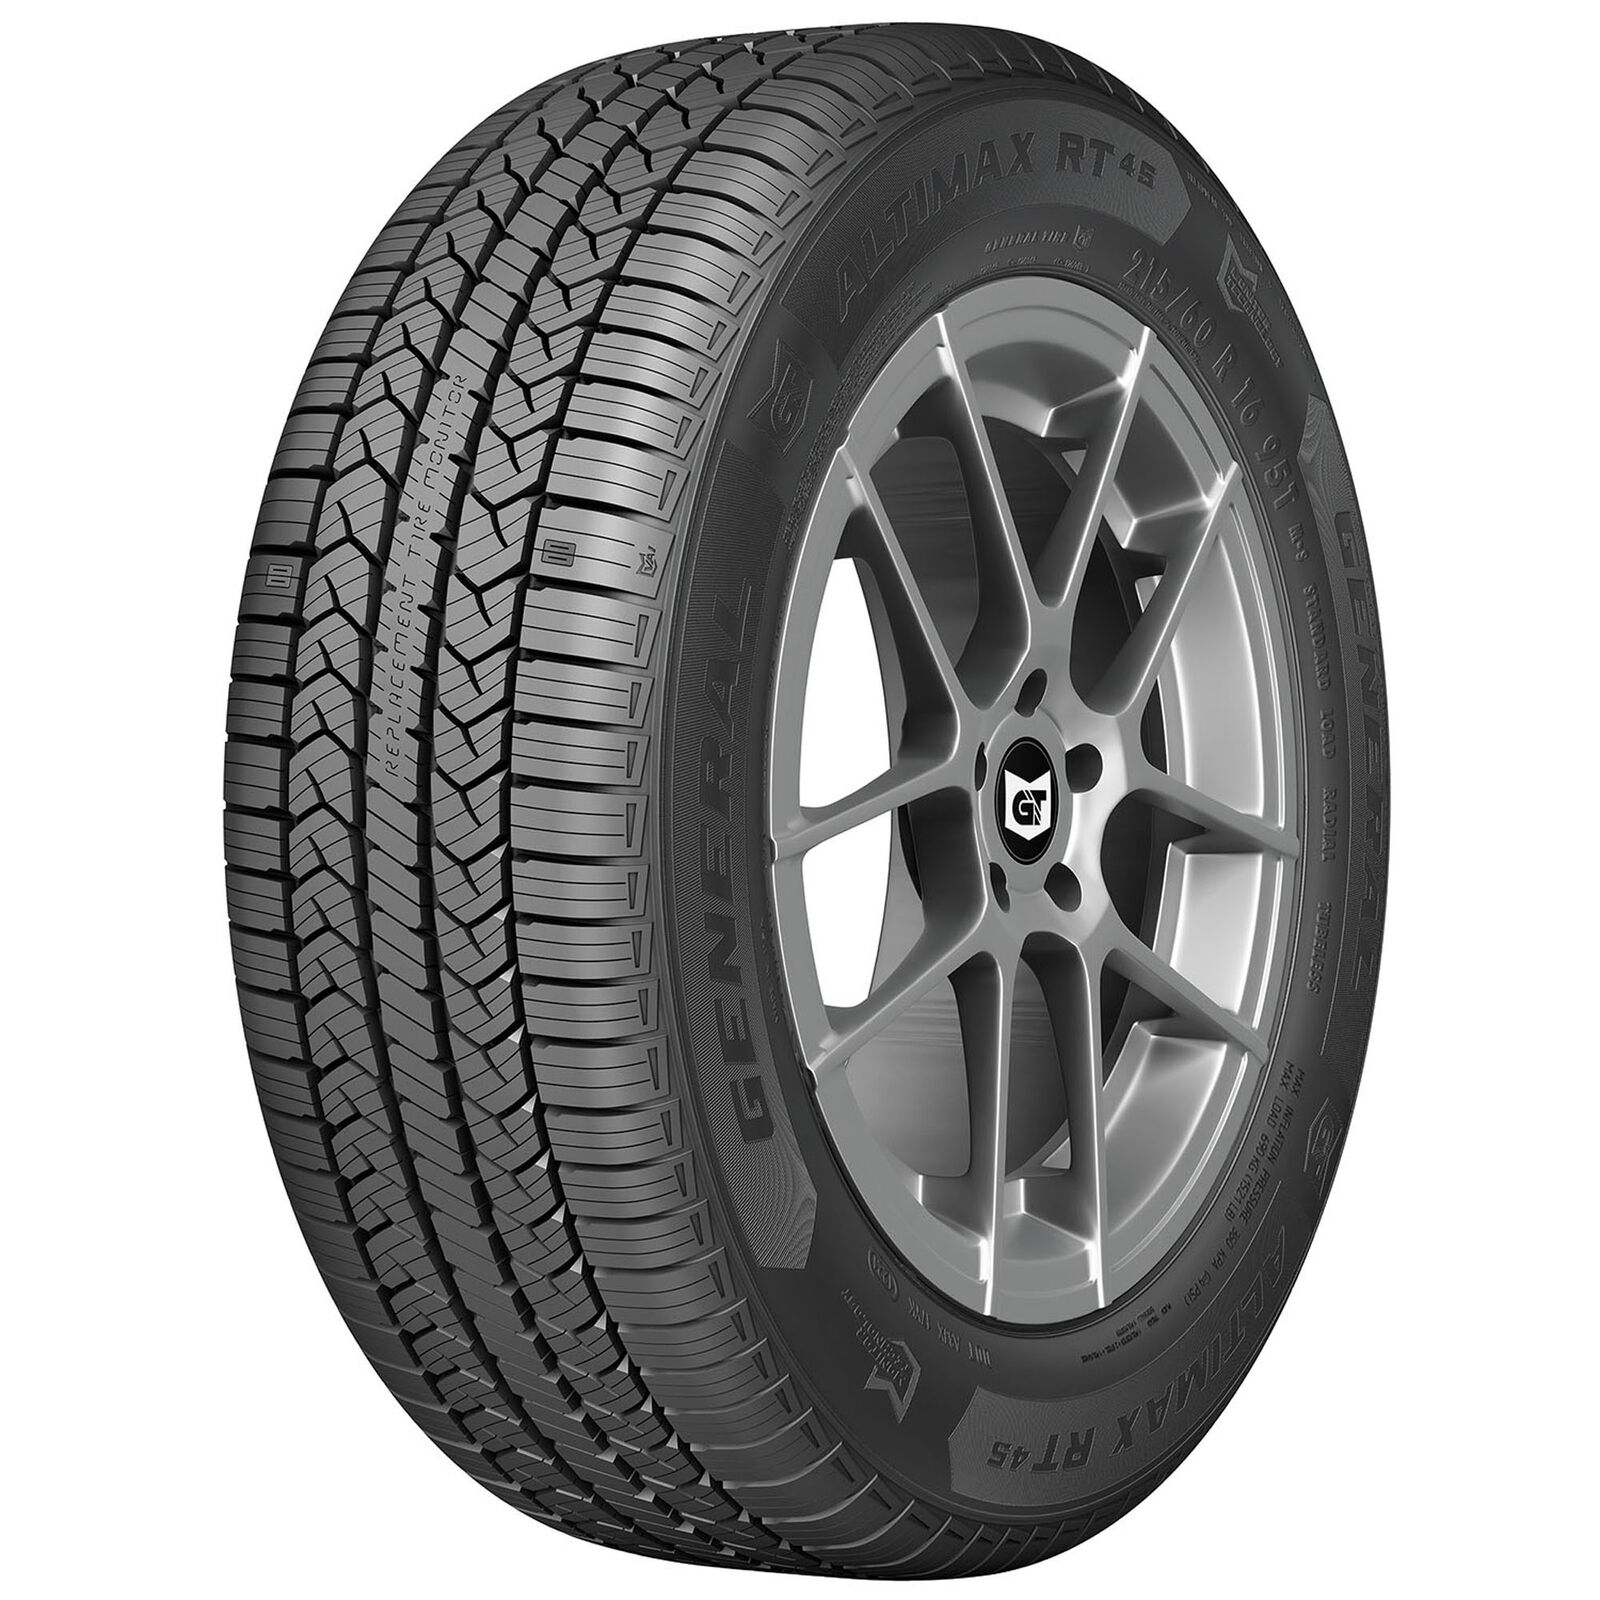 2 New General Altimax Rt45  - 255/45r19 Tires 2554519 255 45 19